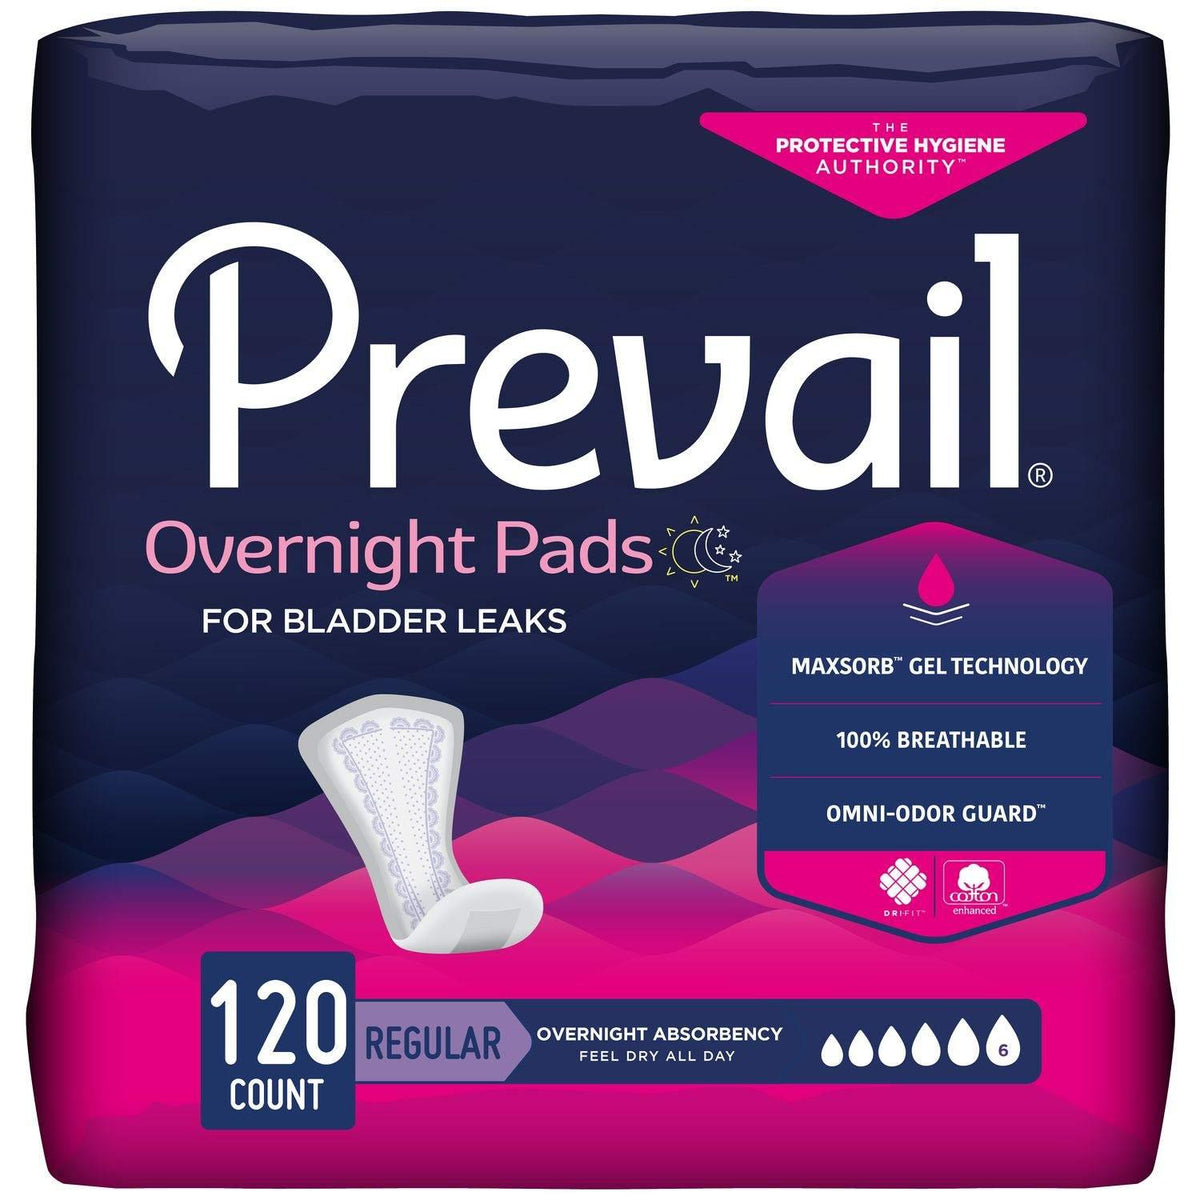 Buy Prevail Air Overnight Heavy Absorbency Brief - Personally Delivered